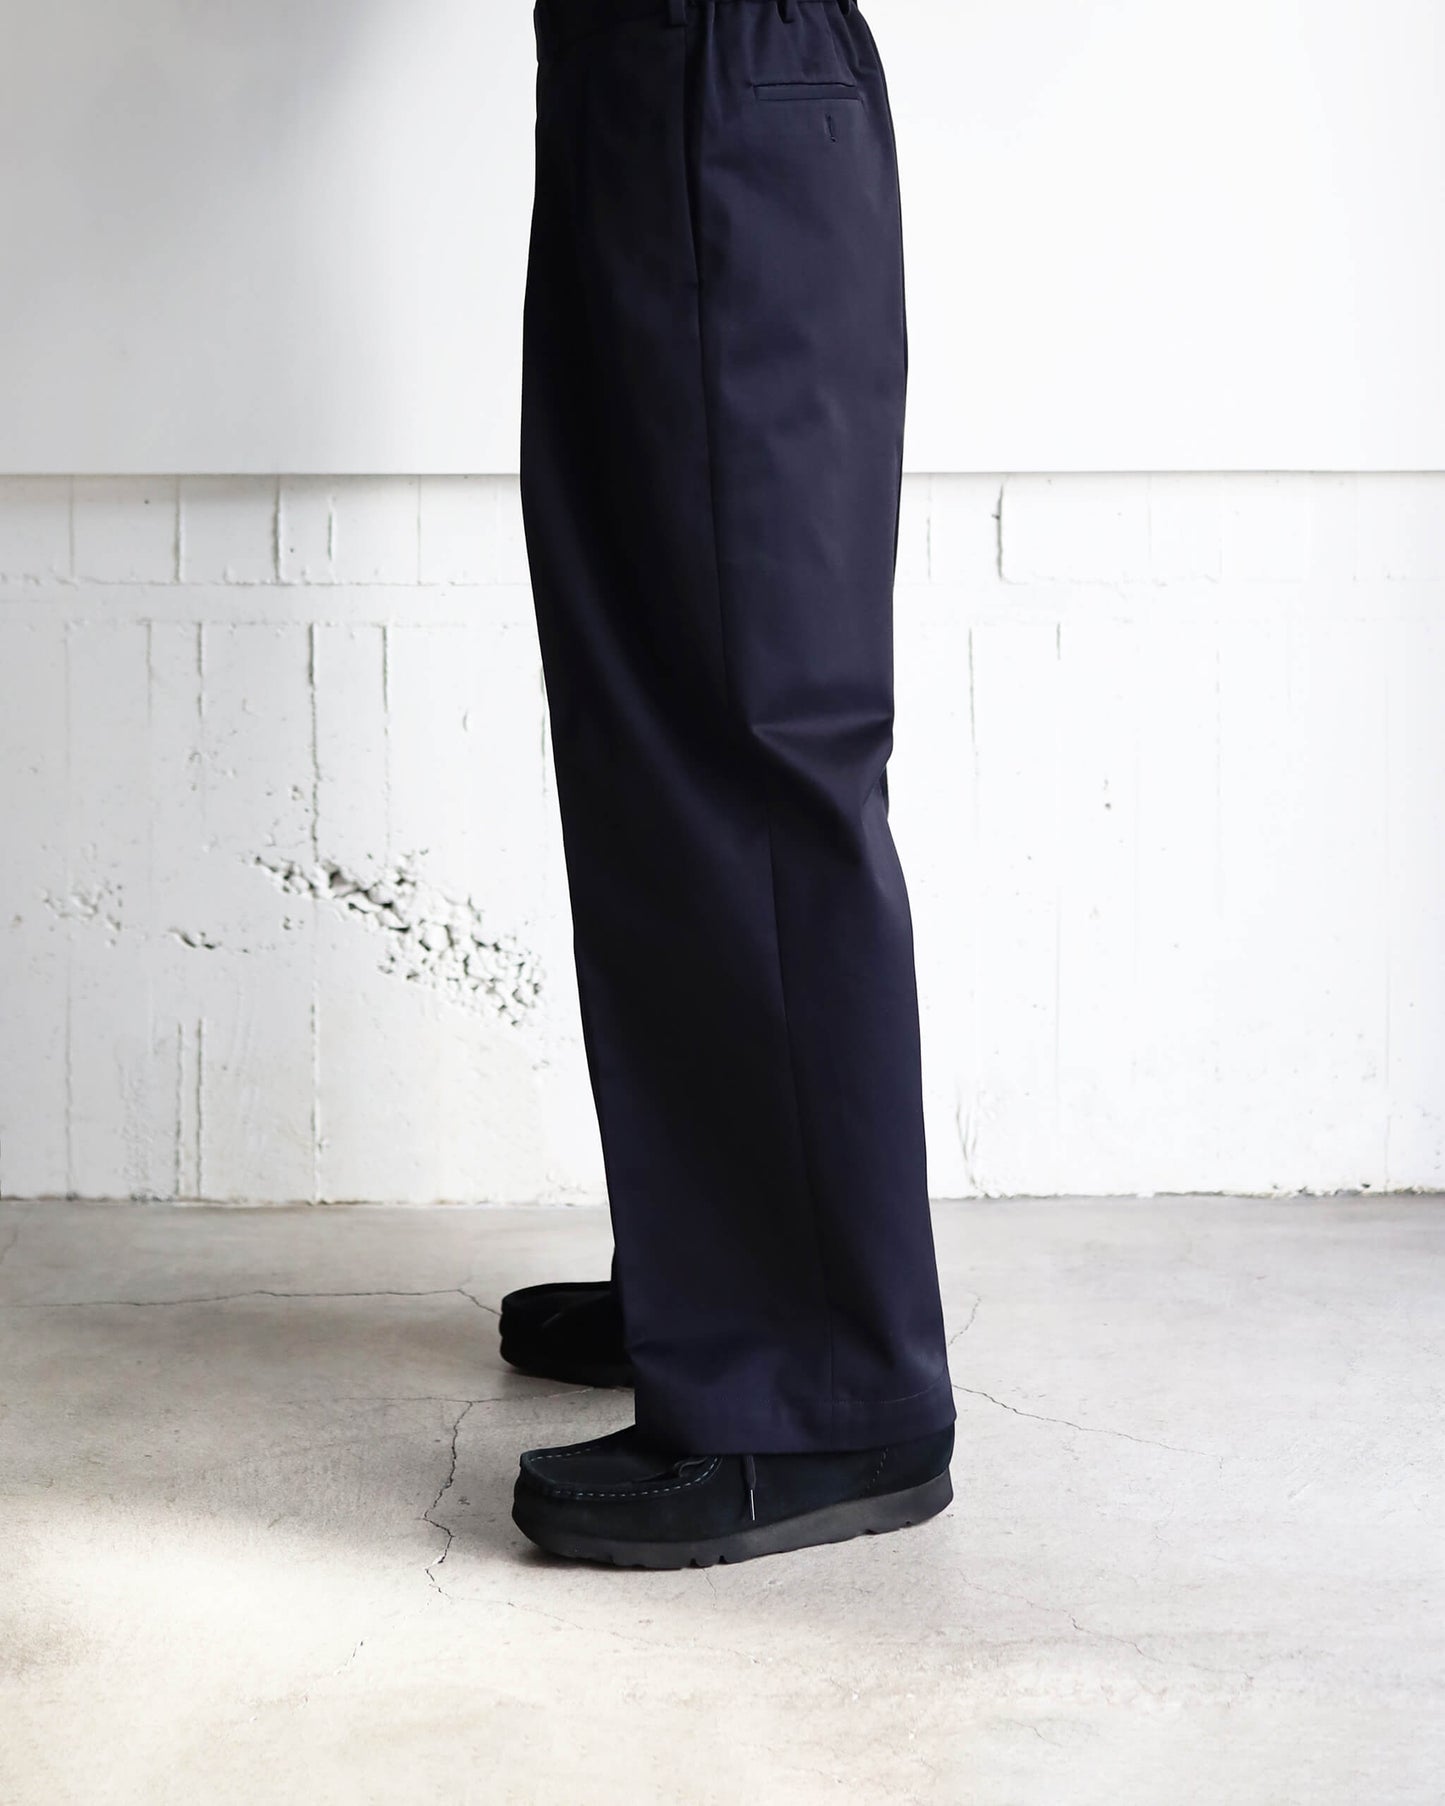 DOUBLE PLEATED TROUSERS ORGANIC COTTON 30/2 TWILL "NAVY"